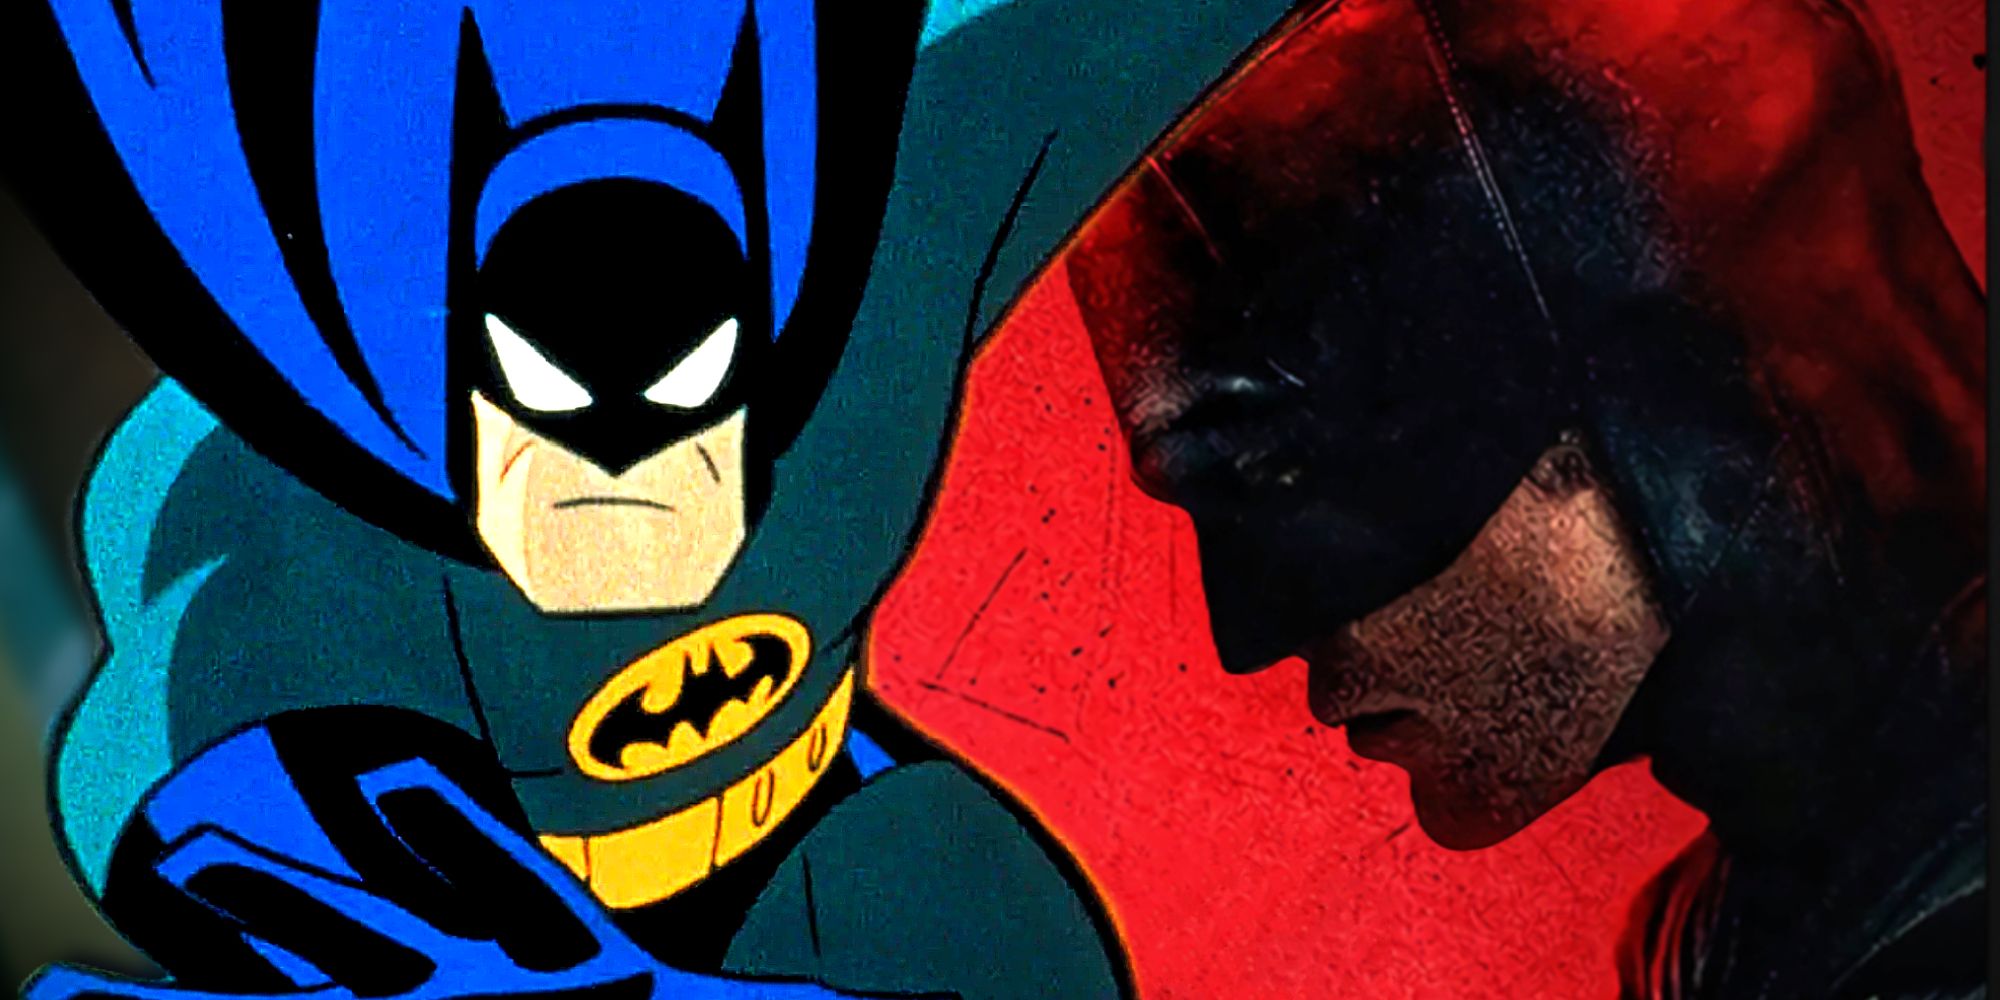 The Dark Knight Leaps in Batman The Animated Series and Broods in The Batman